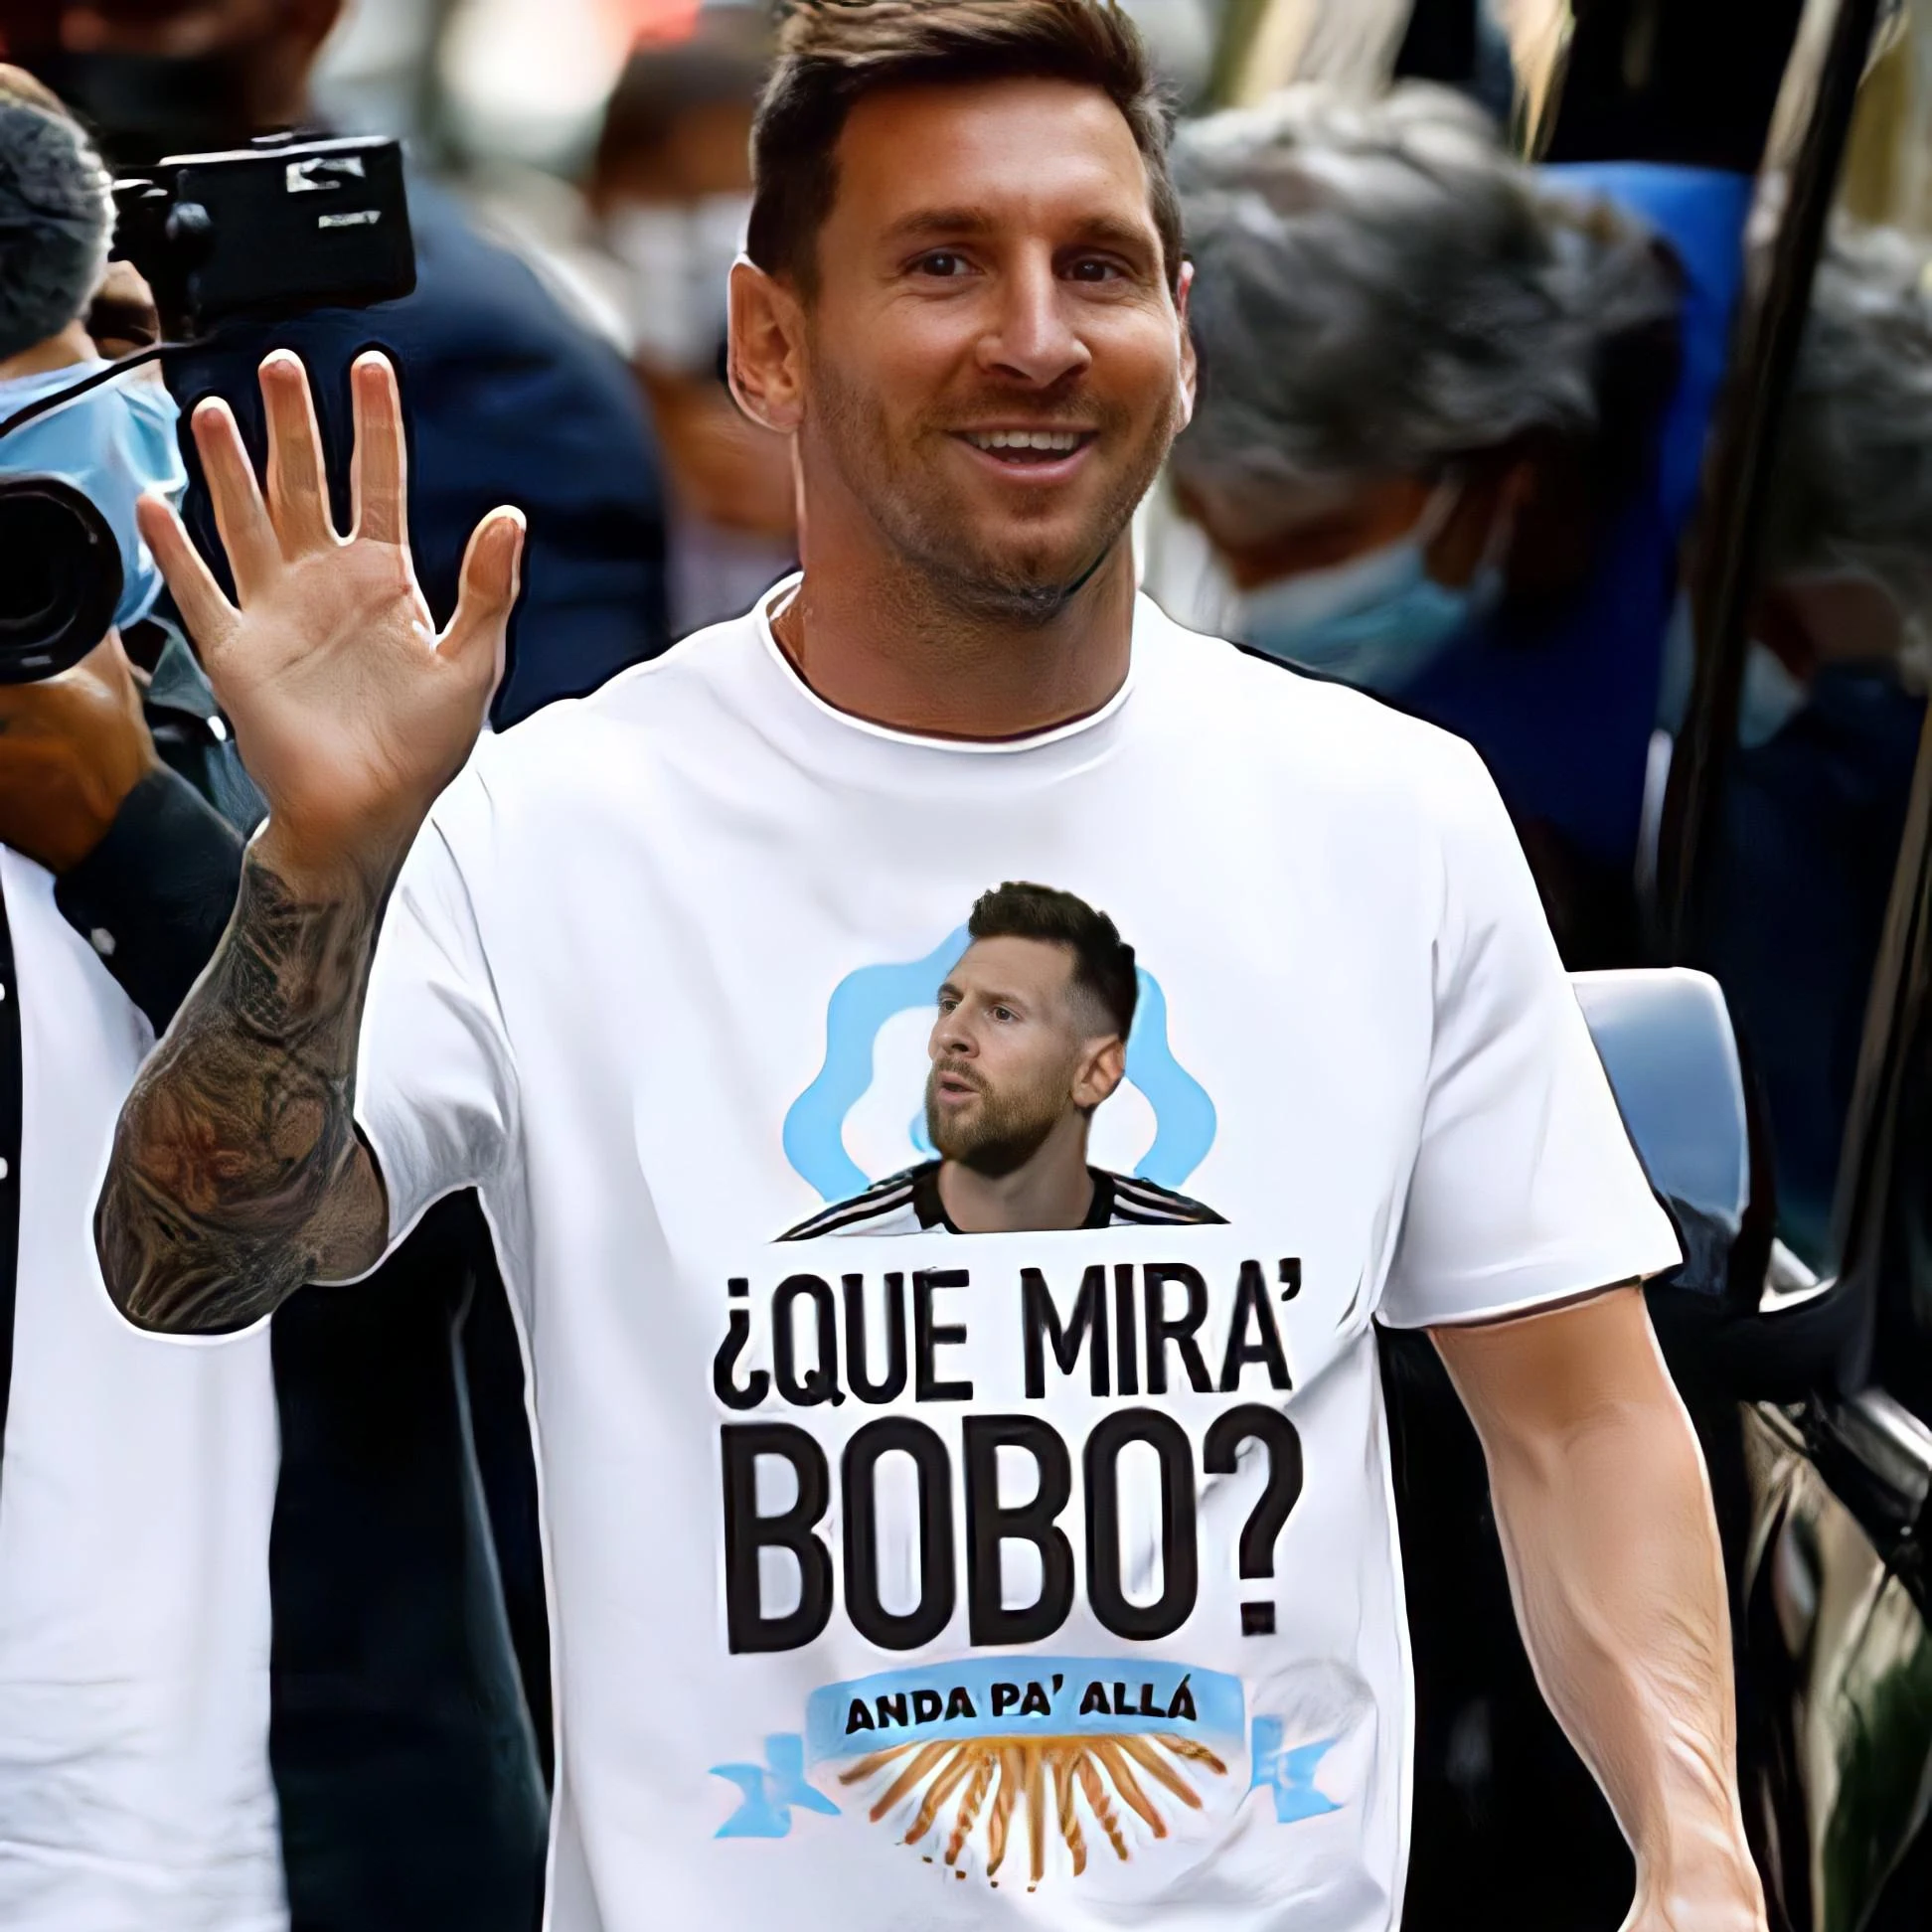 

New Hot Selling Messi Same Style Que Mira Bobo 3d T-Shirt Unisex White and Black Style Casual Short Sleeve T-Shirt Kids